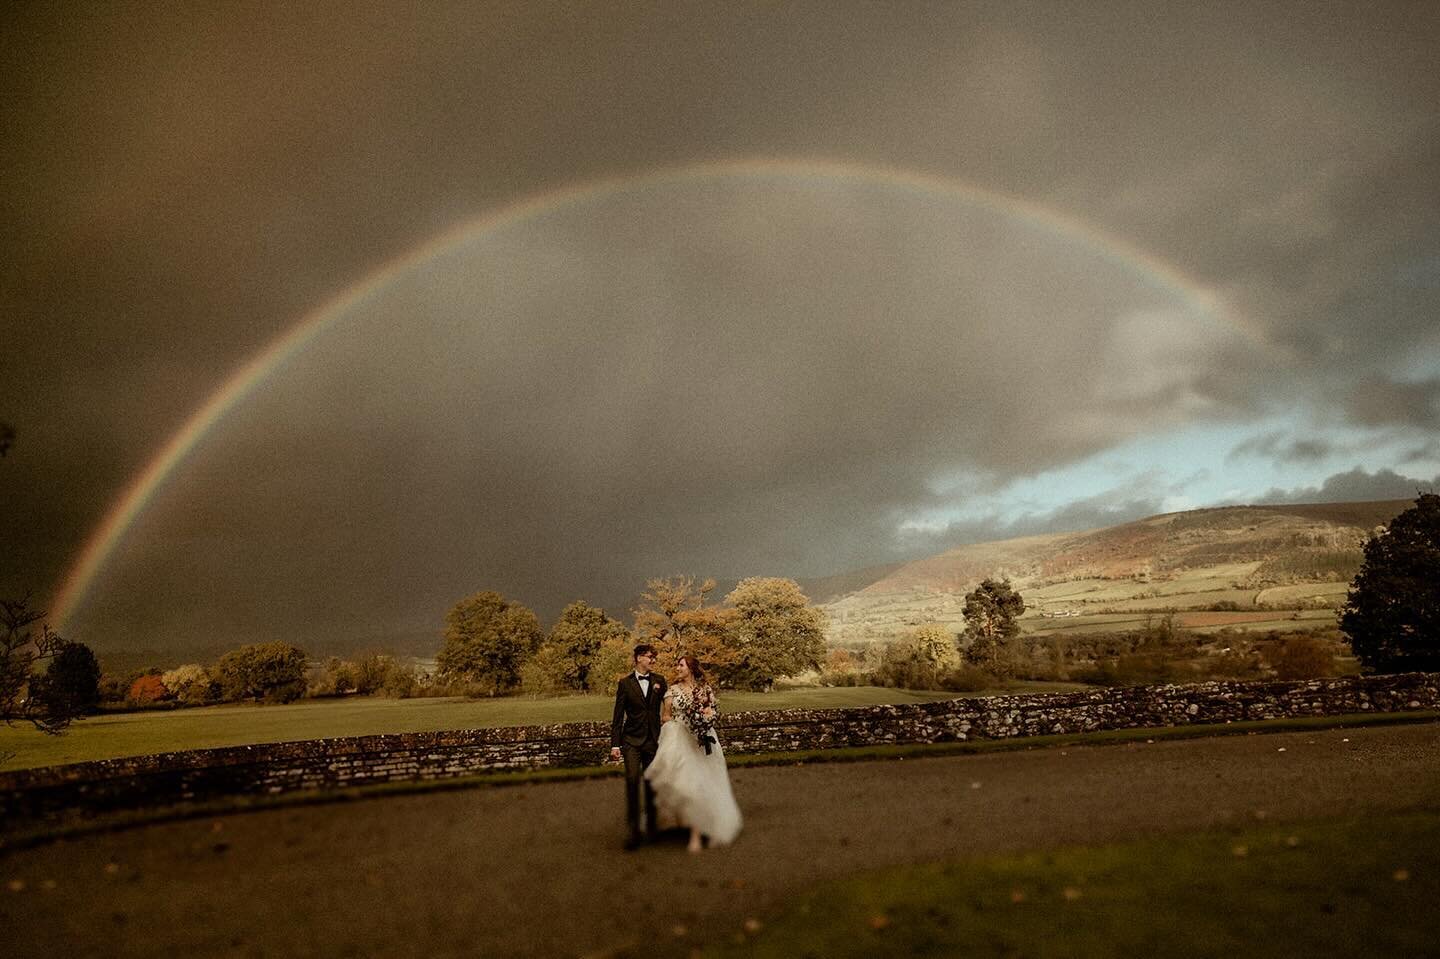 &lsquo;One of Wales&rsquo; most romantic wedding venues&rsquo; 

@babsboardwellphotography documents Amber and Hugh&rsquo;s wedding at Treberfydd last autumn in a new blog post on her website. Babs&rsquo; distinctive and evocative style of photograph